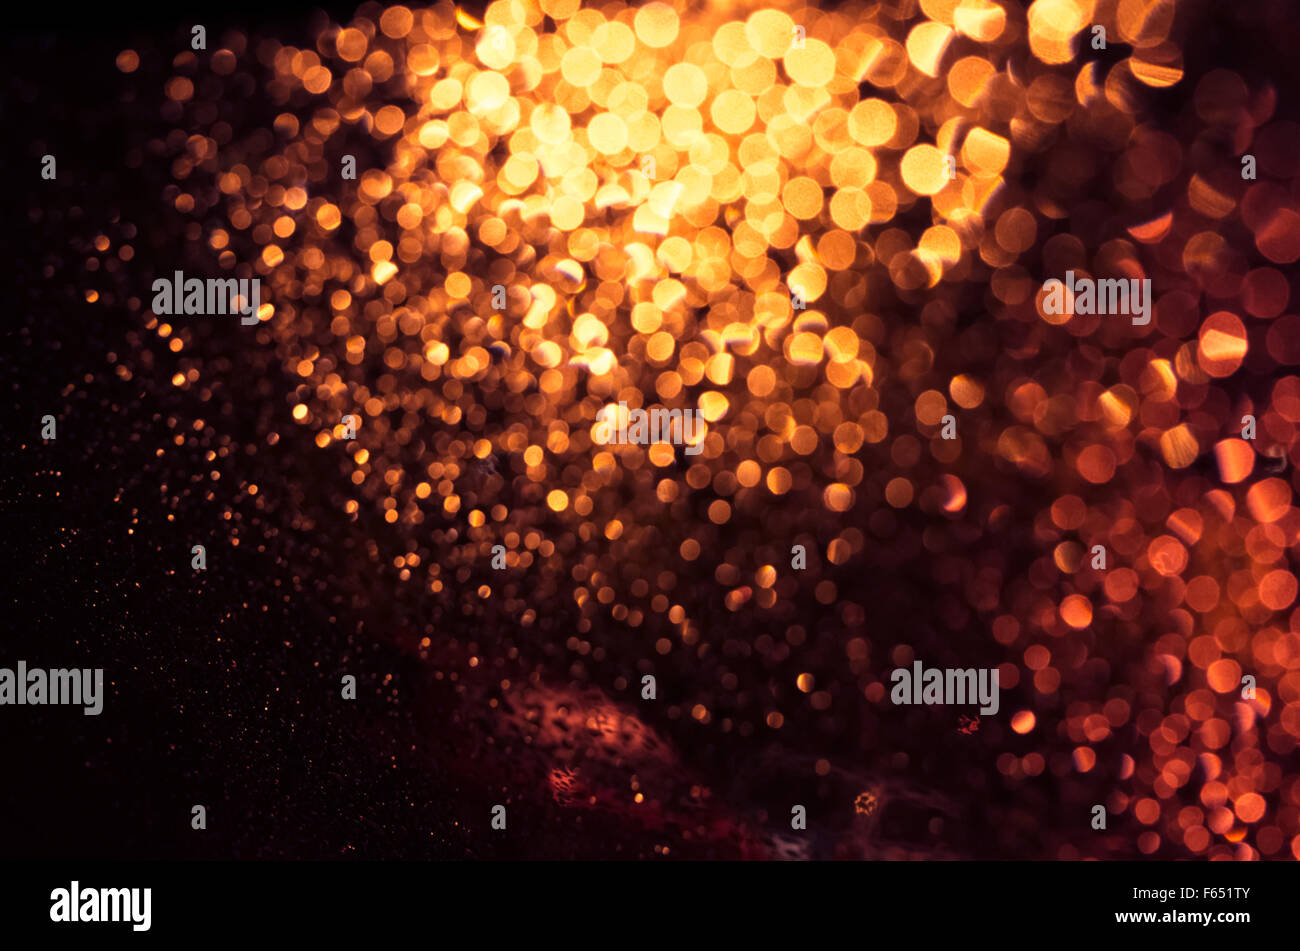 Defocused abstract golden lights background. Natural bokeh photo patten Stock Photo